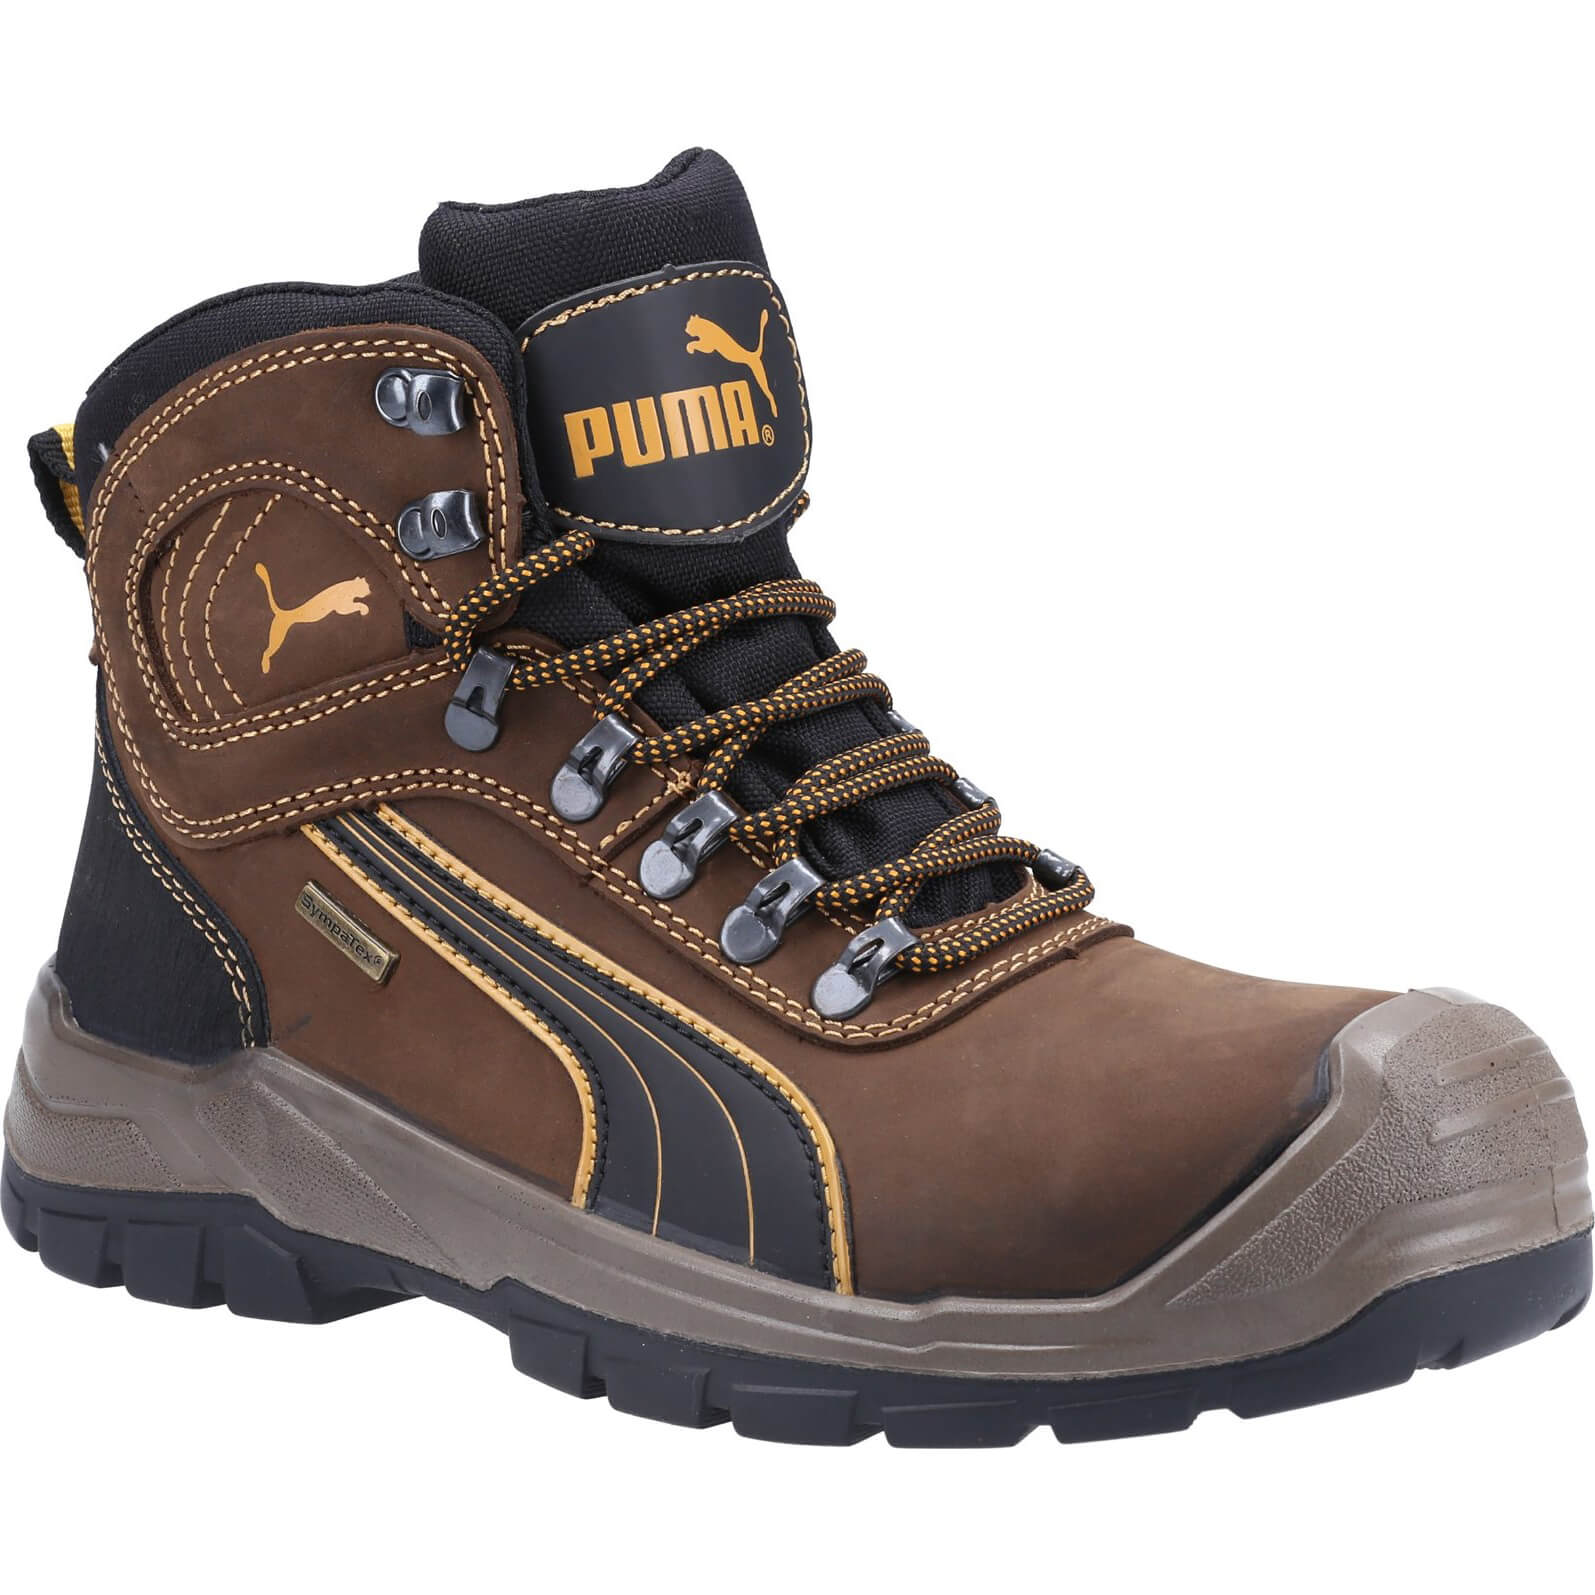 Image of Puma Mens Sierra Nevada Mid Safety Boots Brown Size 10